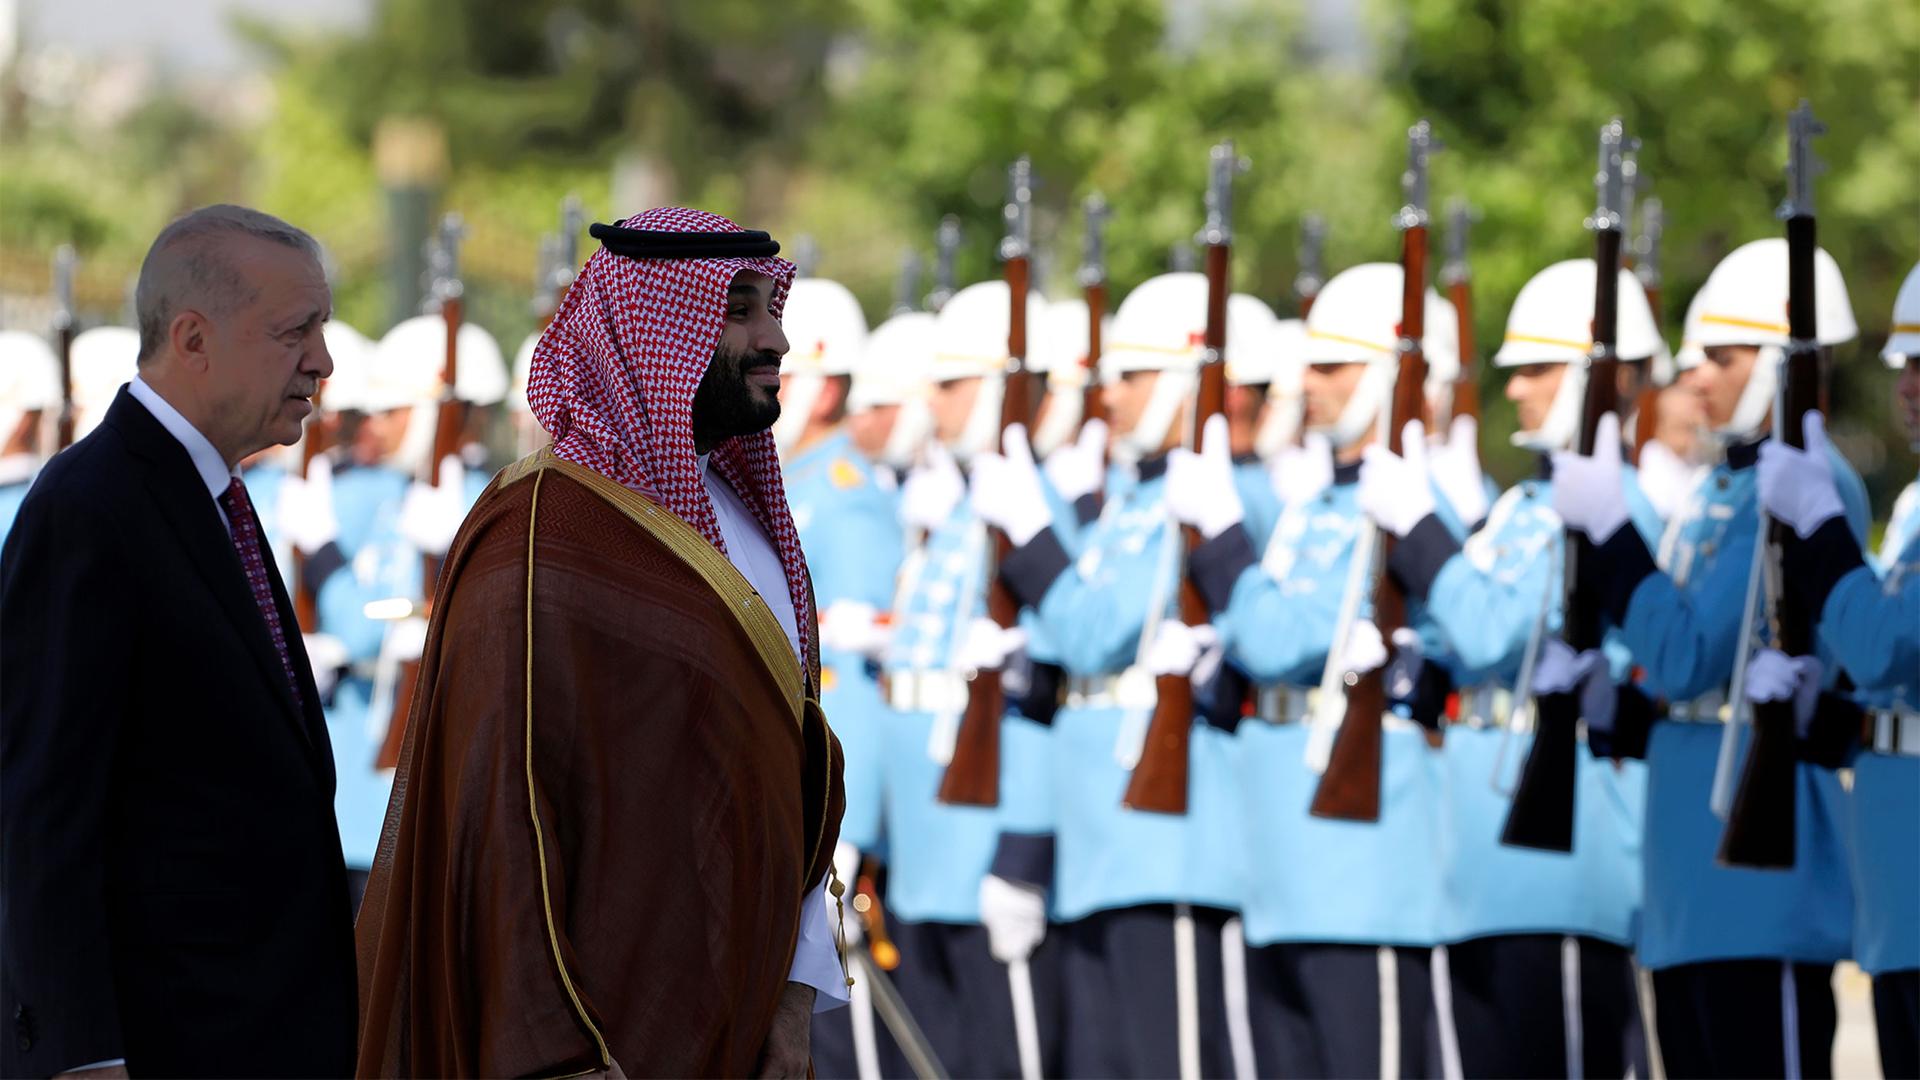 Turkish President Recep Tayyip Erdoğan and Saudi Crown Prince Mohammed bin Salman review a military honor guard during a welcome ceremony, in Ankara, Turkey